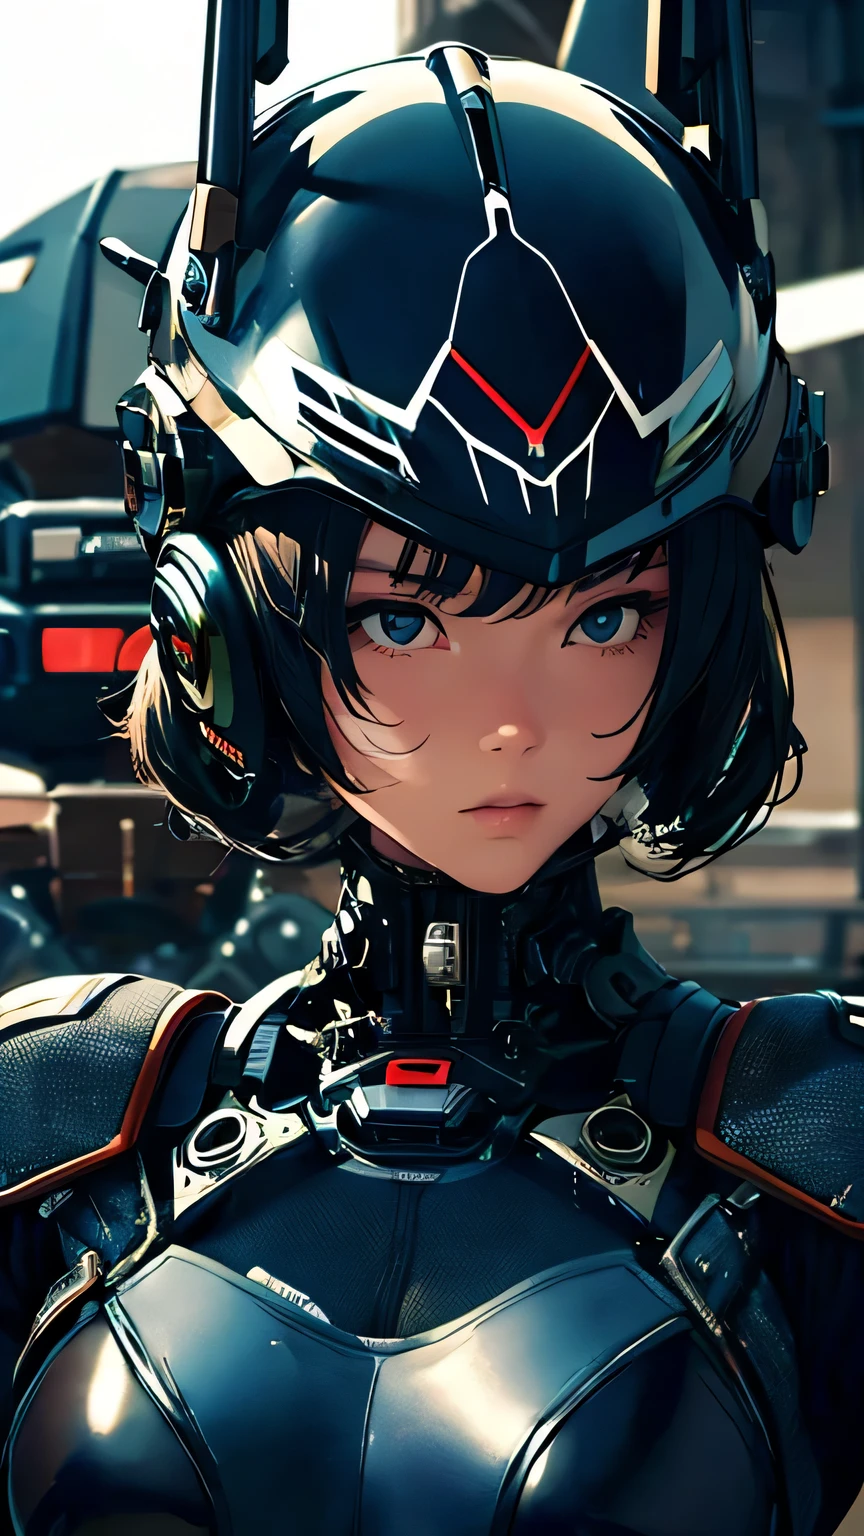 best image quality, excellent details, 超High resolution, (fidelity: 1.4), best illustrations, Favor details, 1girls high concentration, With a delicate and beautiful face, dressed in black and white mecha, Wearing a mecha helmet, Have a direction controller, riding on motorcycle, the background is a high-tech lighting scene of the futuristic city. masterpiece, 最high quality, high quality, High resolution, (close up of face)